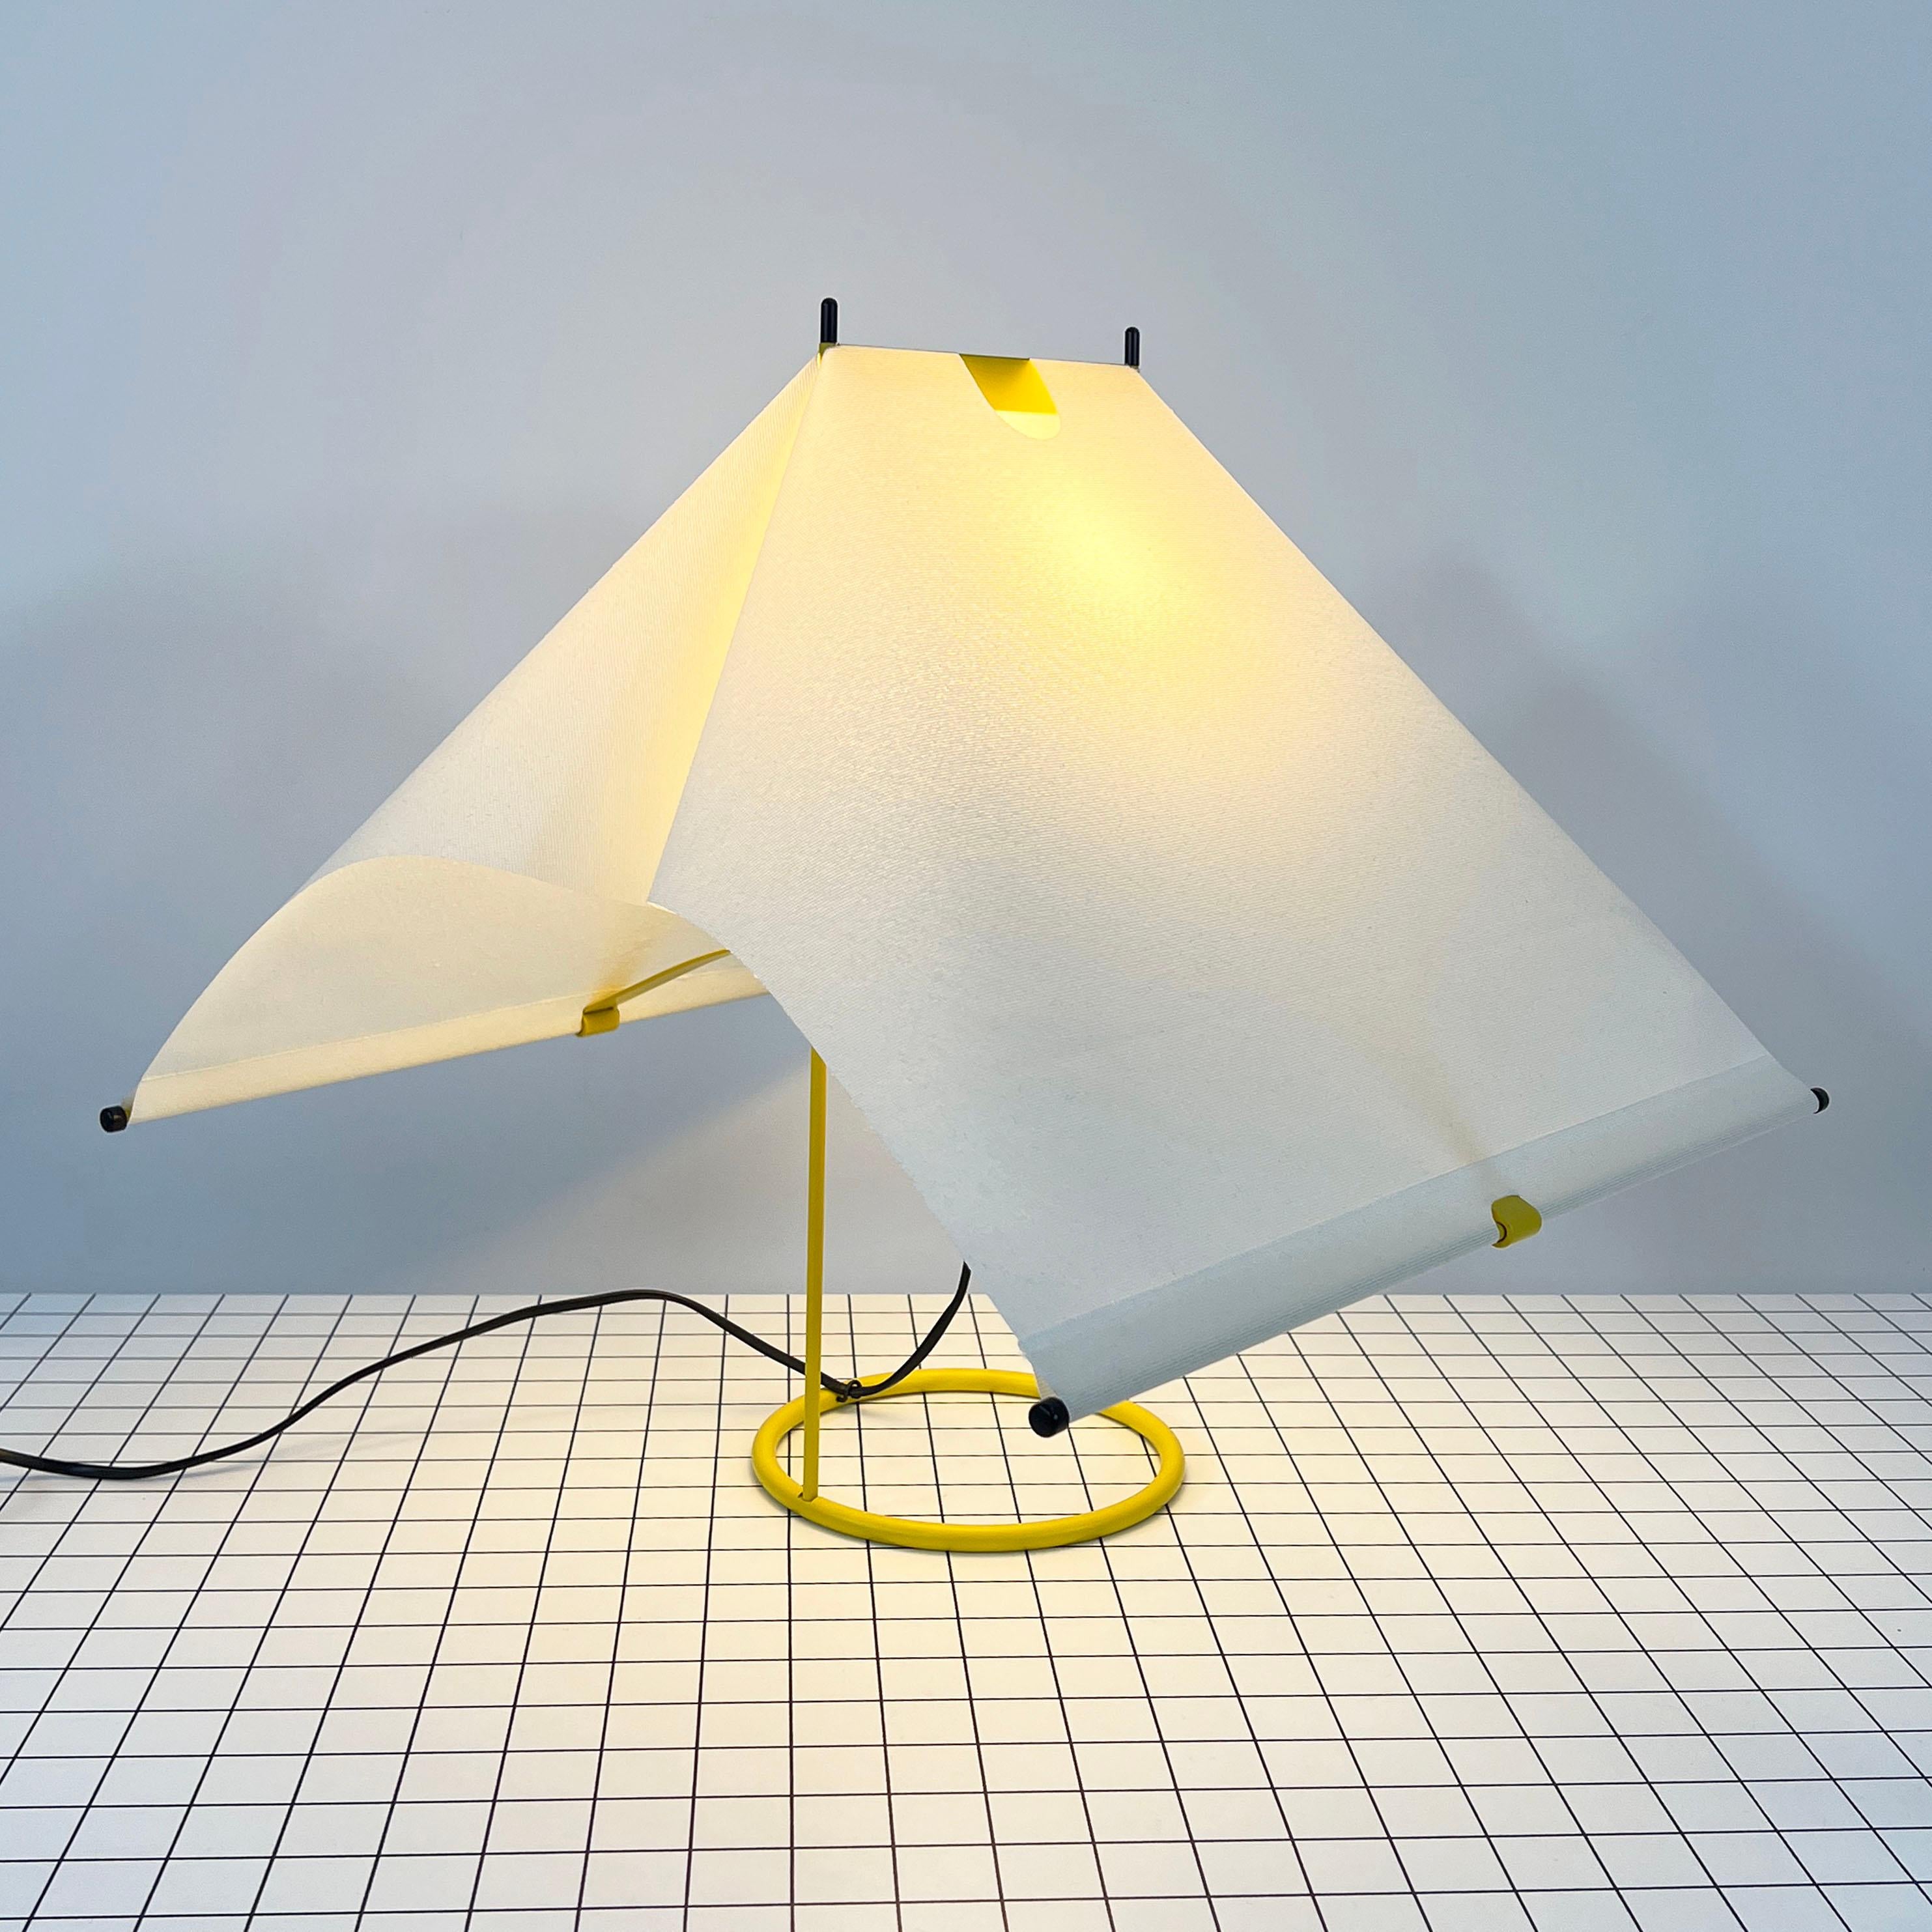 Designer - Piero De Martini 
Producer - Arteluce
Model - Le Falene Table Lamp 
Design Period - Eighties
Measurements - Width 49 cm x Depth 49 cm x Height 46 cm
Materials - Lacquered Steel, Taut Fabric Shade
Color - Yellow, White 
Electrical